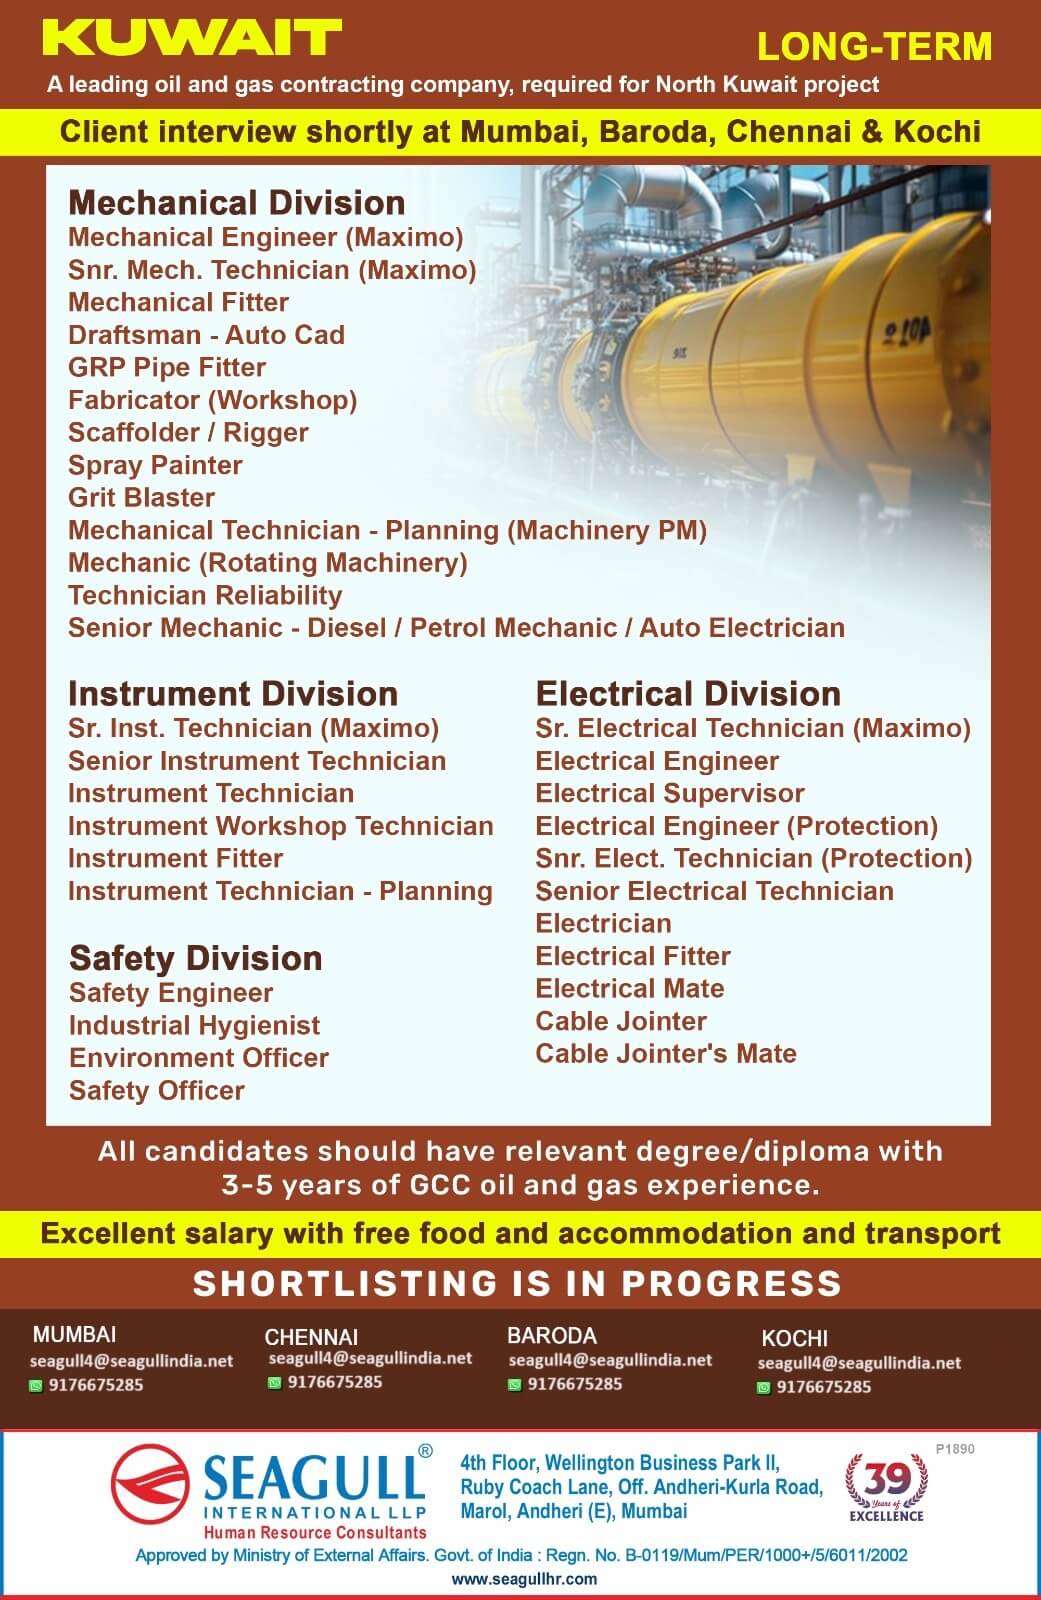 VERY URGENT REQUIREMENTS FOR OIL & GAS LONG TIME PROJECT AT KUWAIT